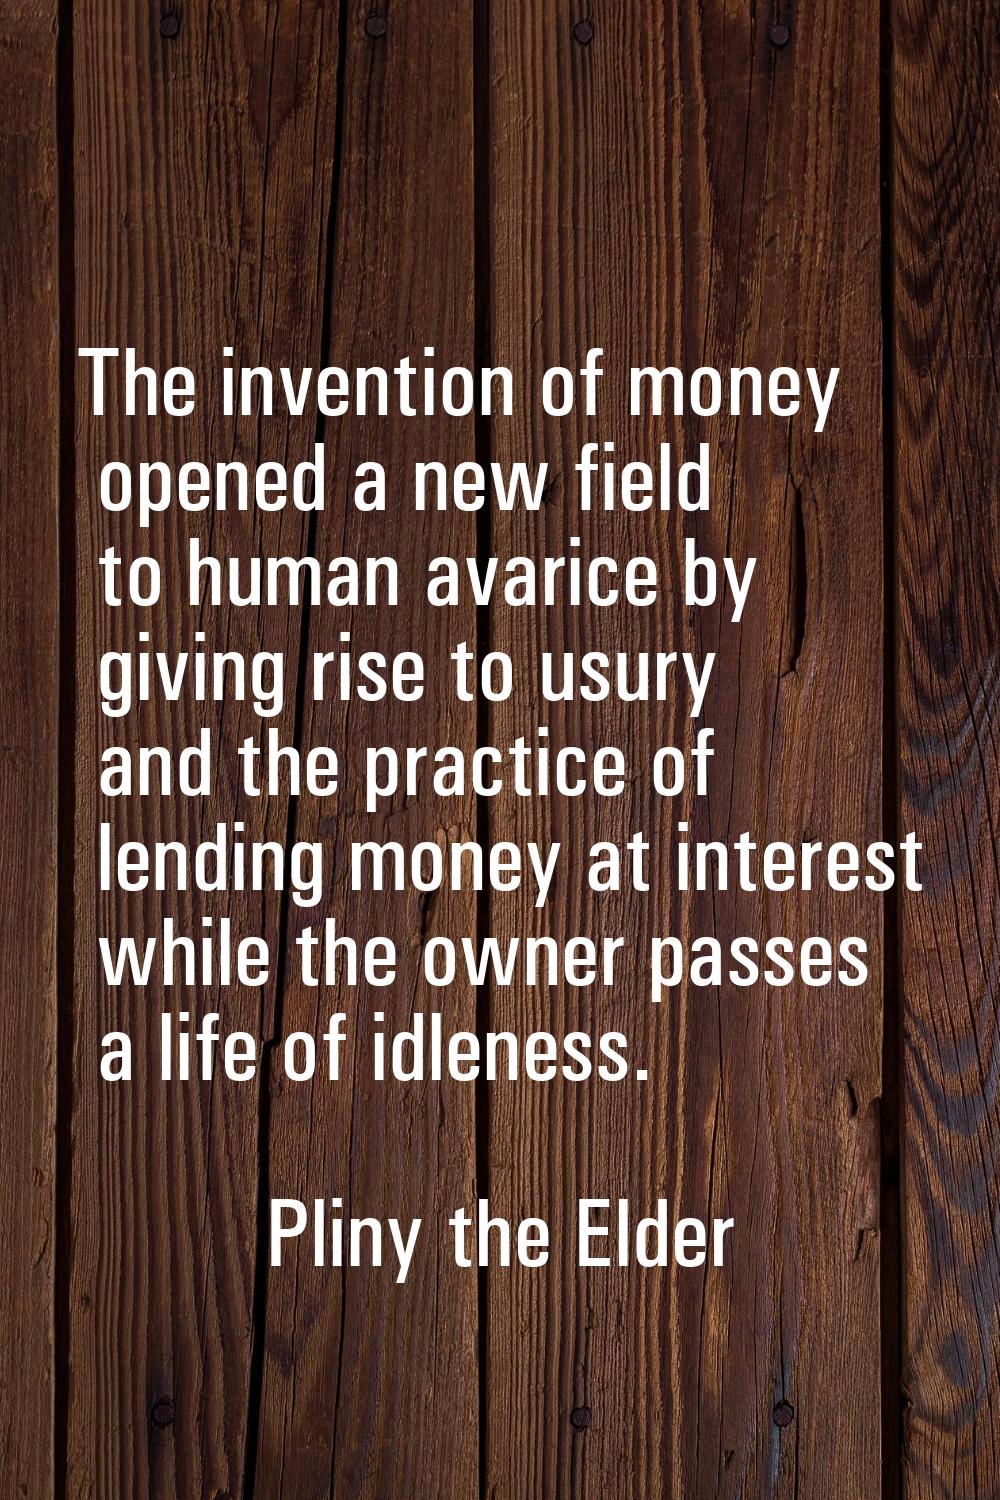 The invention of money opened a new field to human avarice by giving rise to usury and the practice